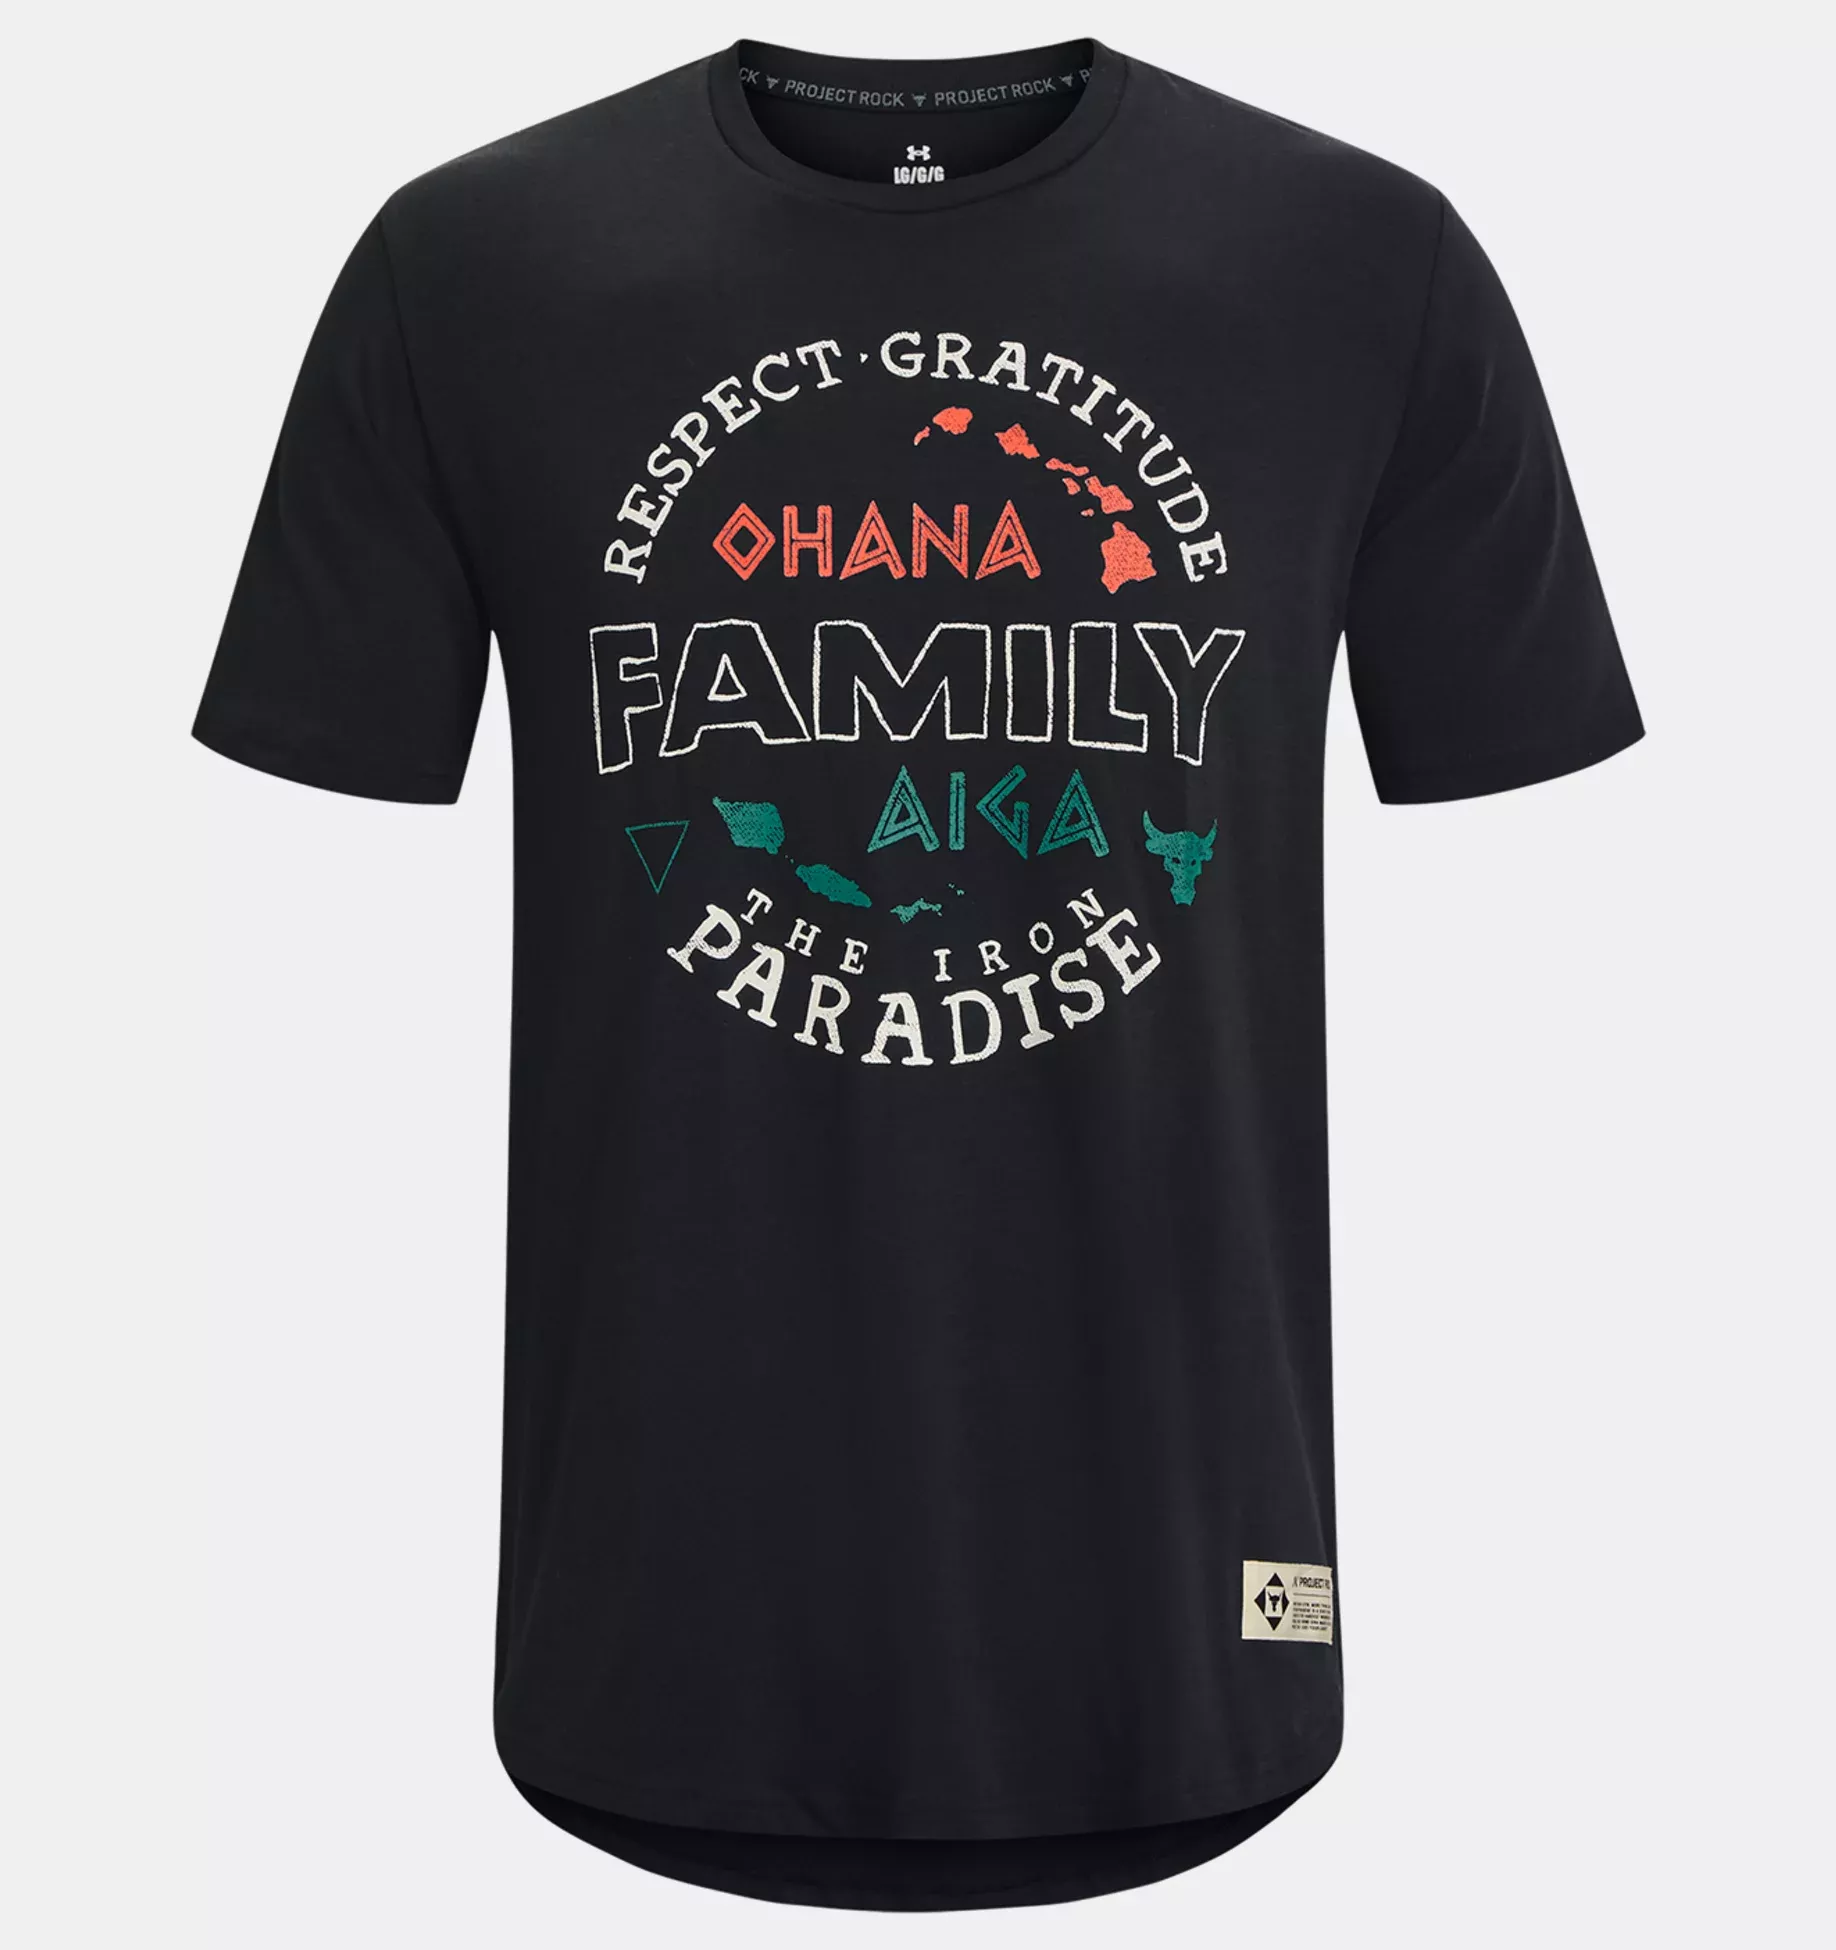 Under Armour Project Rock Family T-Shirt